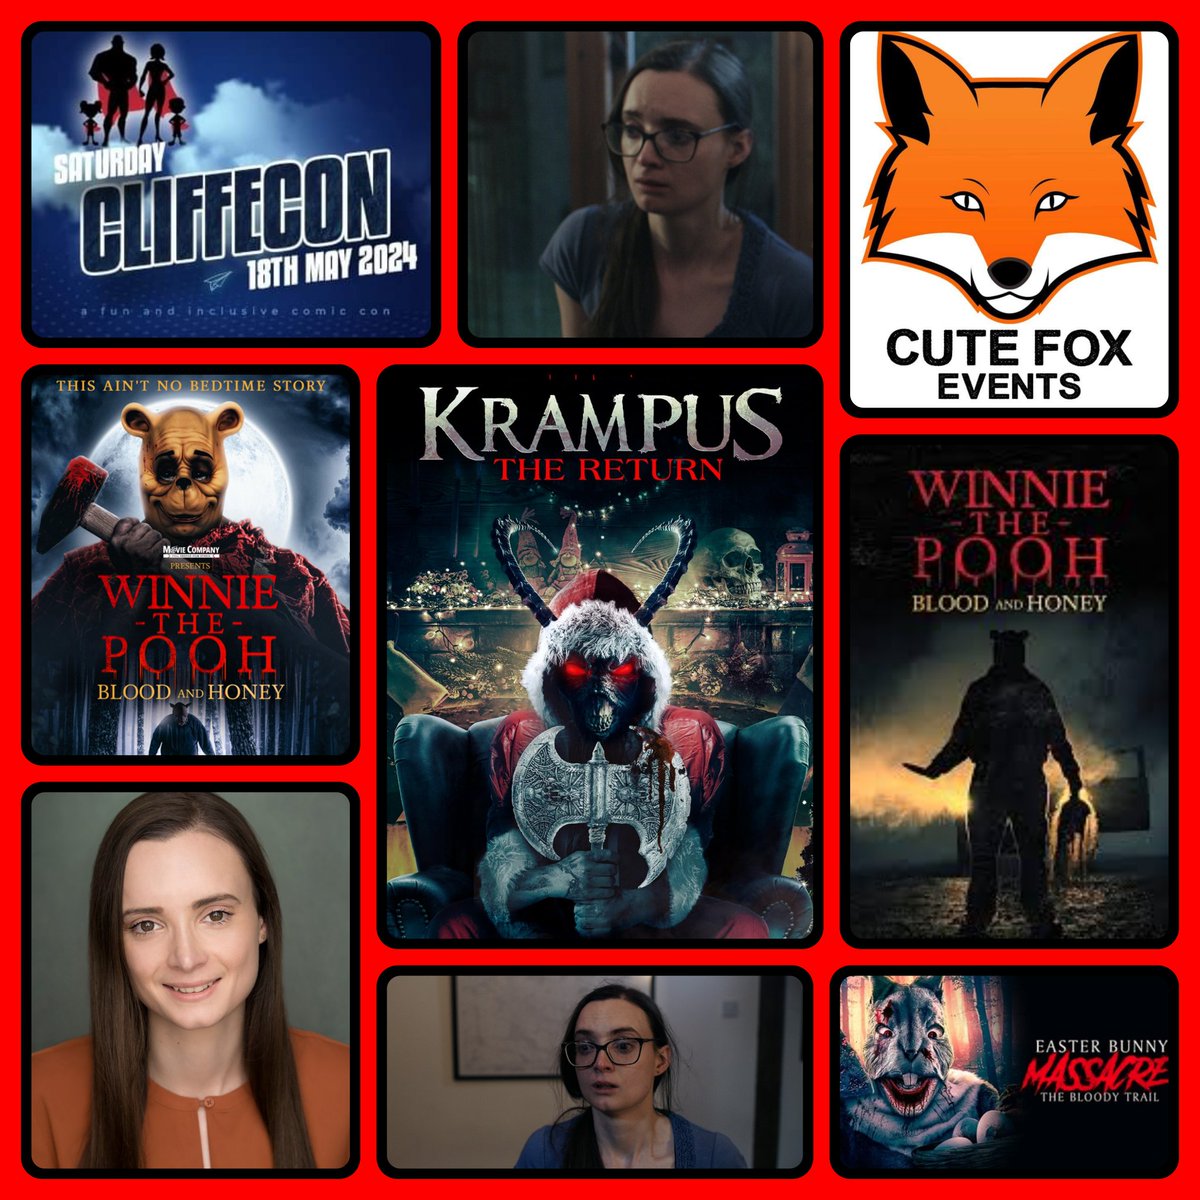 #NatashaRoseMills @poohbandh #Easterbunnymassacre #returnofkrampus appearing at @Cliffecon @cutefoxevents  at the @OakleafSports on Saturday the 18th of May 2024 courtesy of @andybrittle1